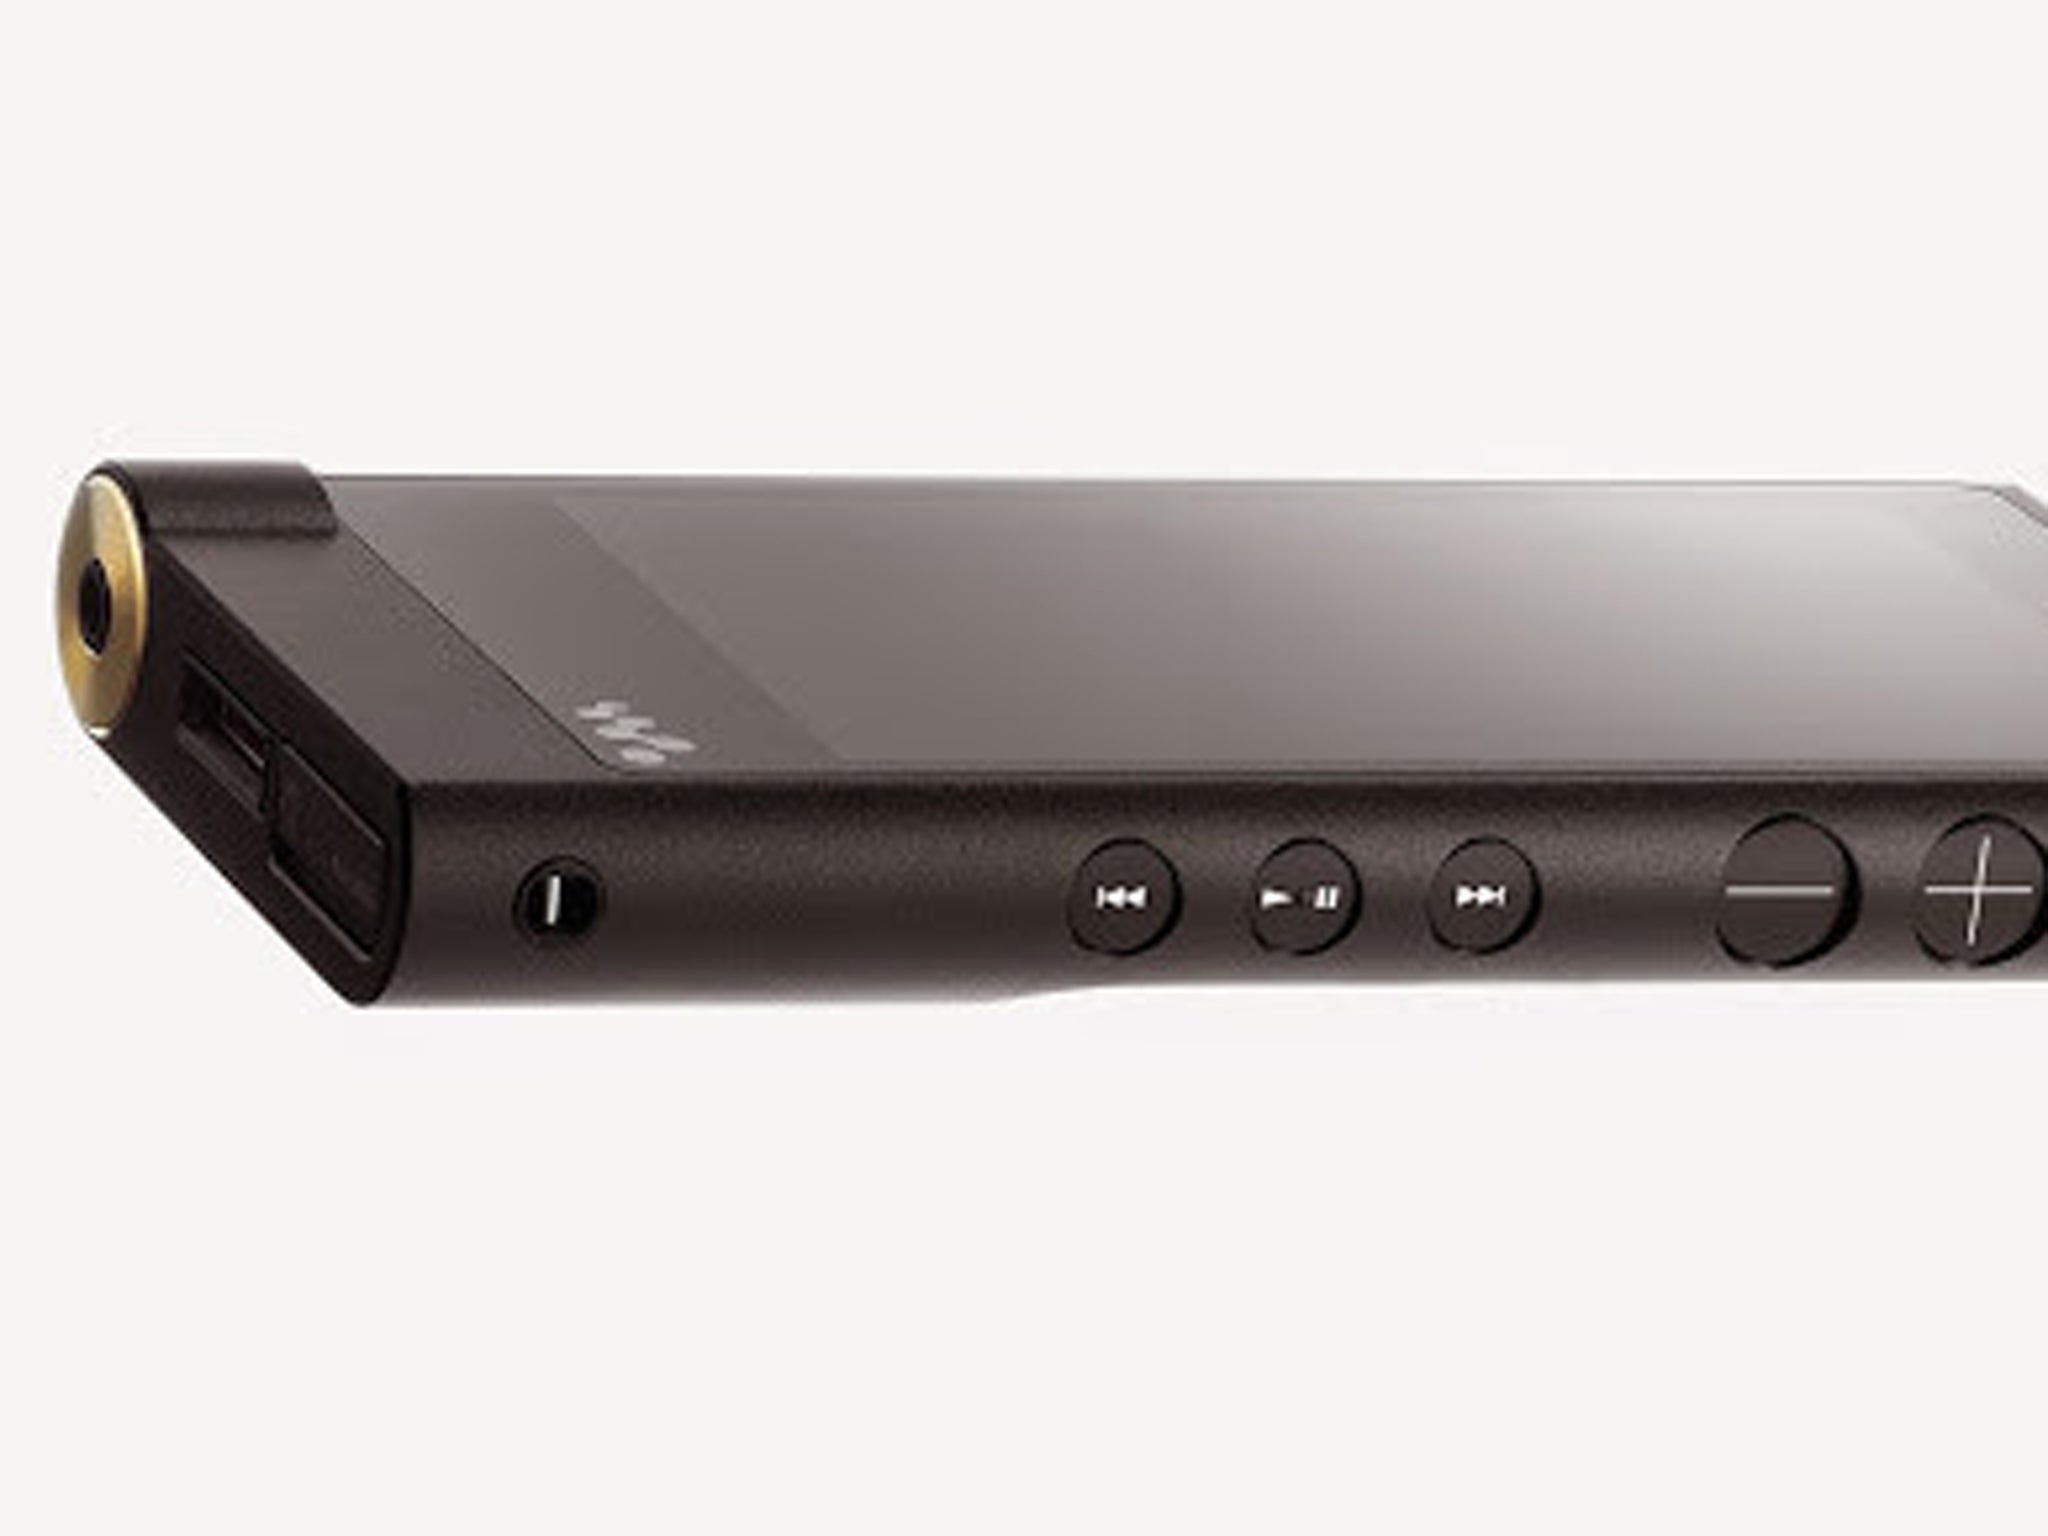 Sony launches new Walkman, with high-end sound at a high price 